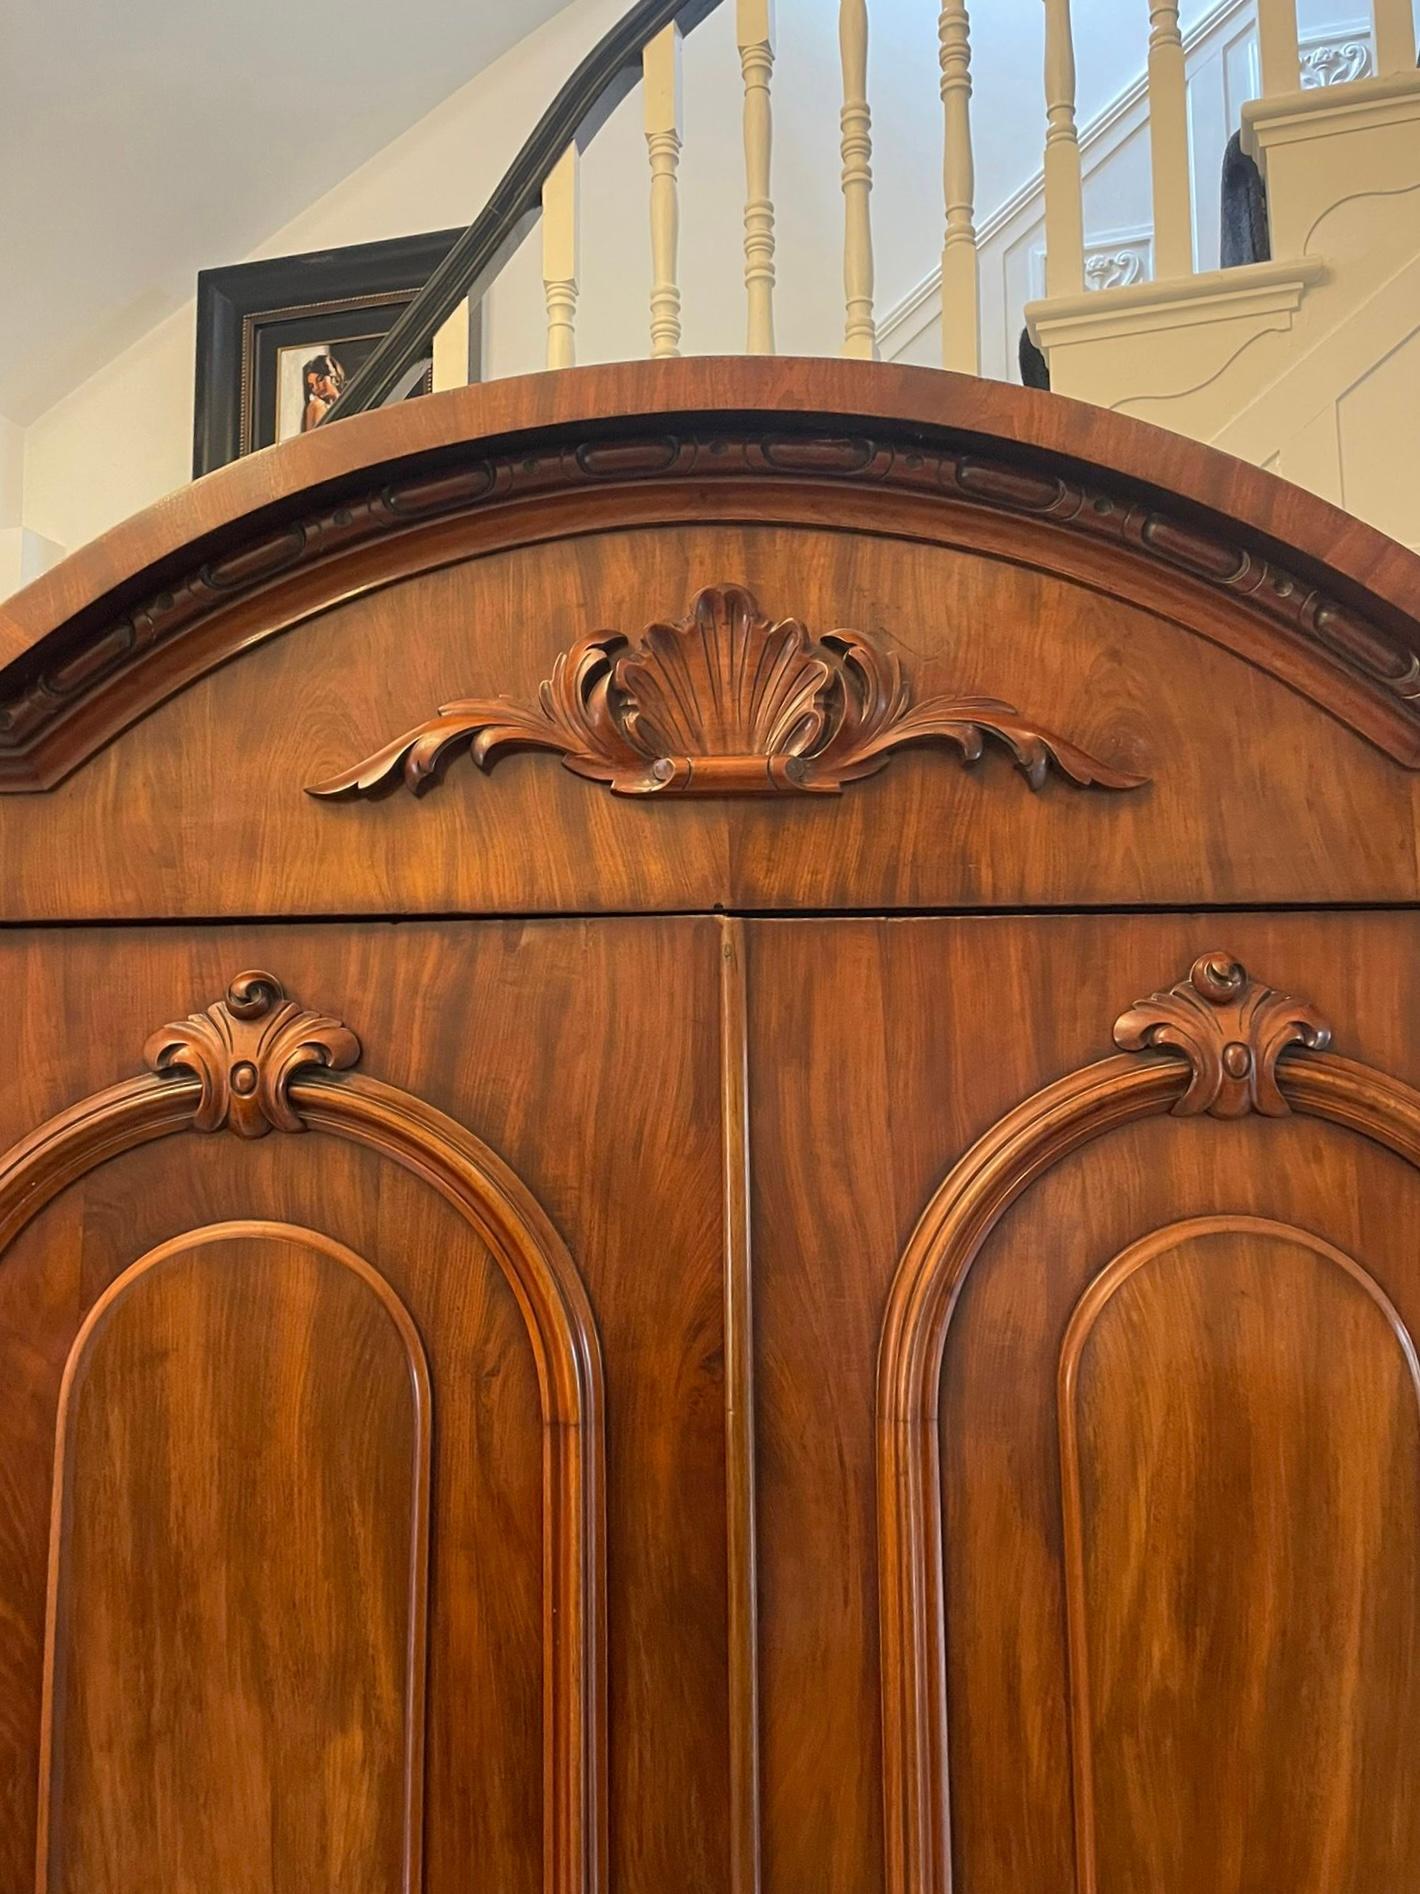 Outstanding quality antique Victorian figured mahogany wardrobe having an fabulous quality figured and carved mahogany arched top cornice above a pair of figured and carved mahogany 
moulded panelled doors opening to reveal two hanging compartments